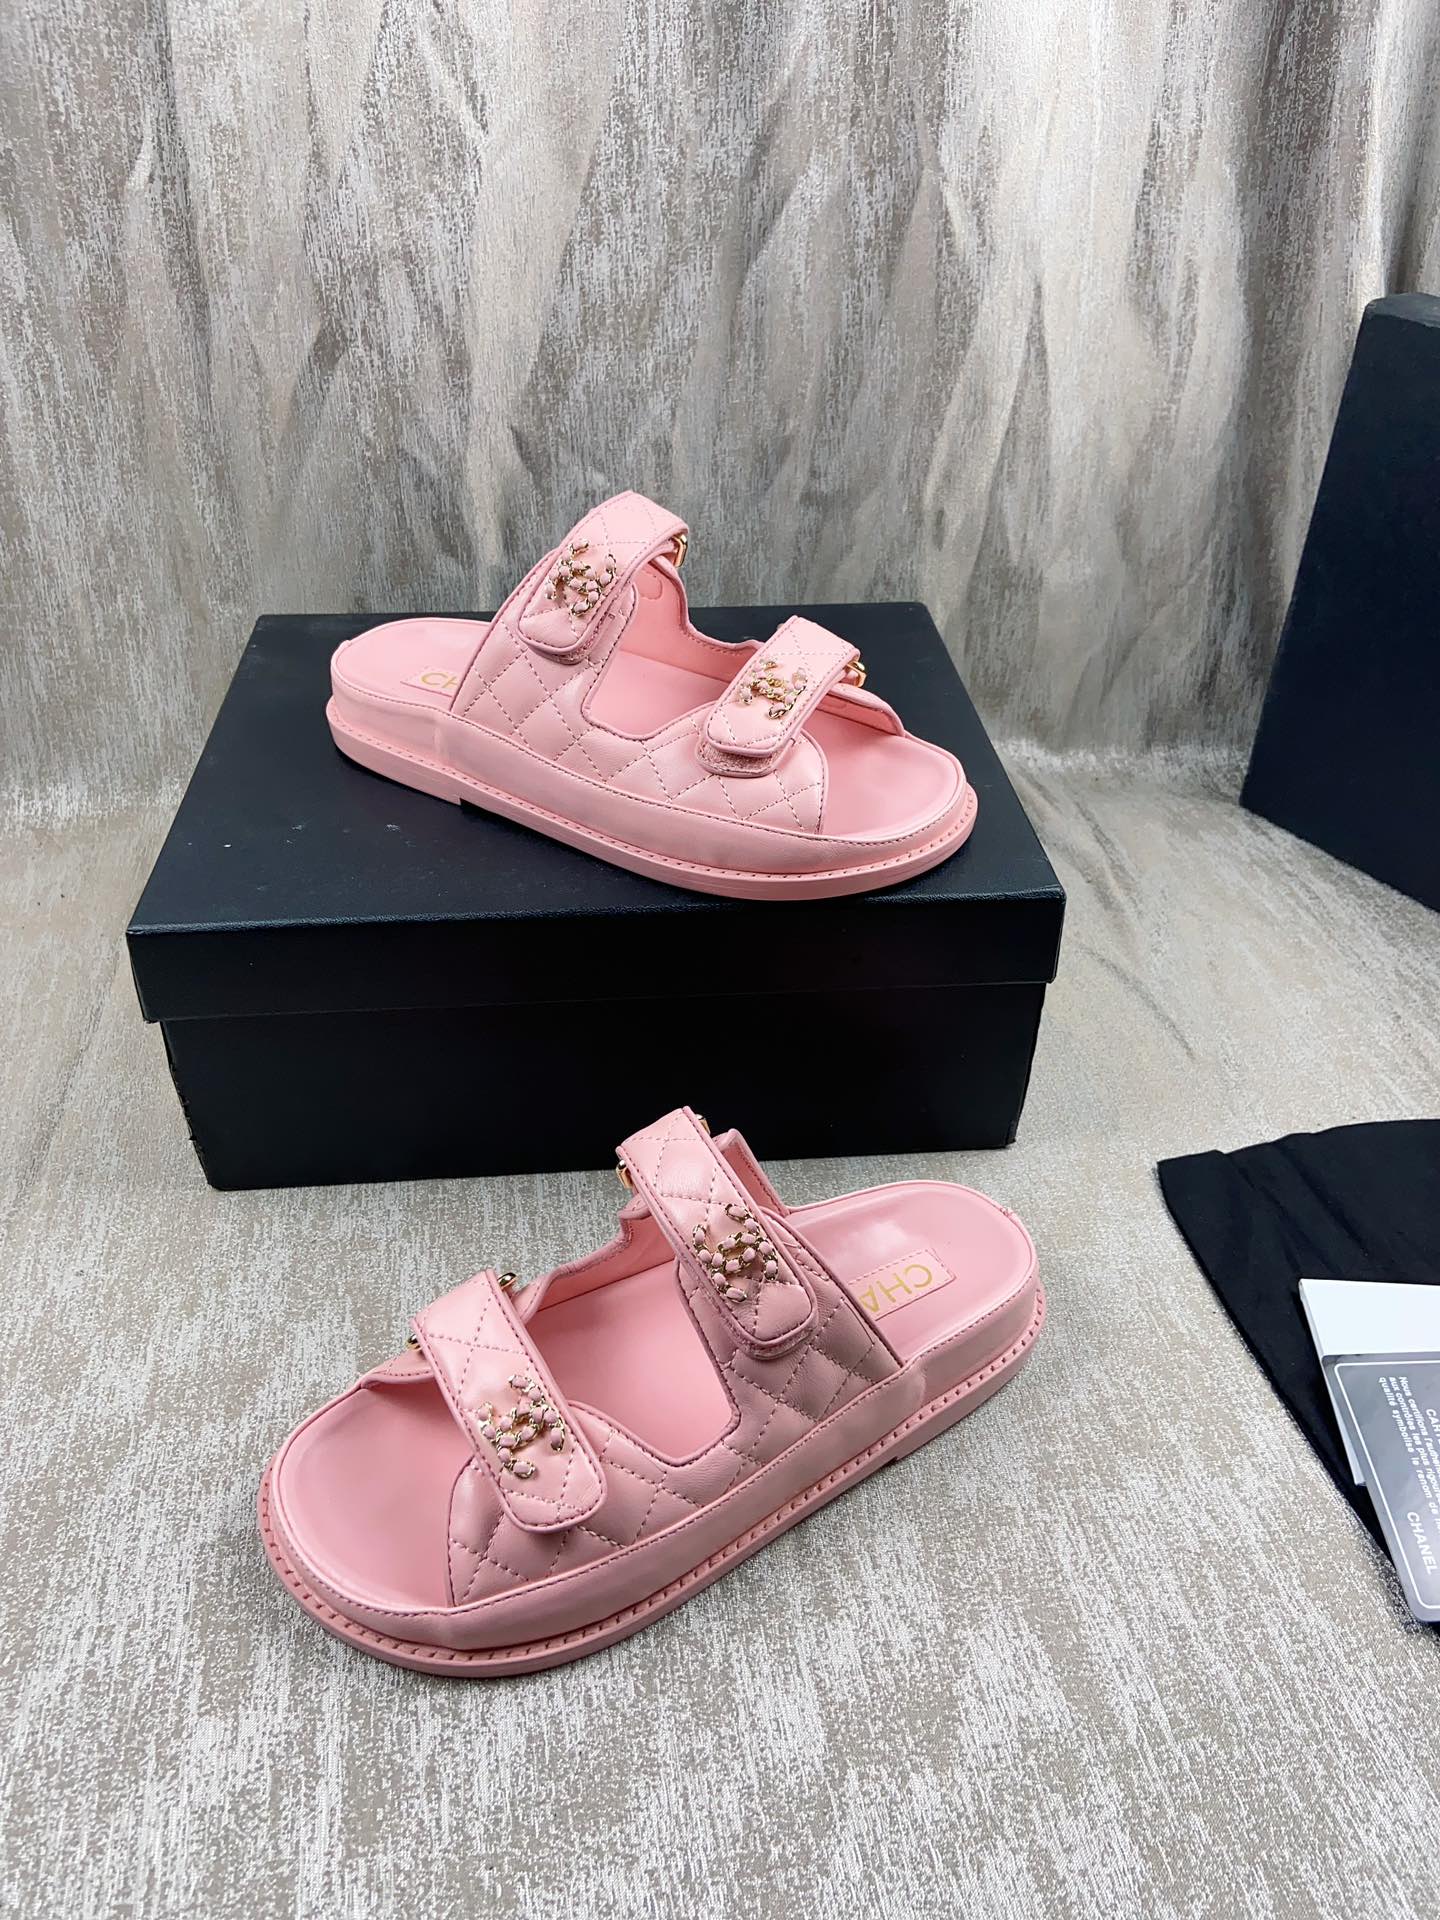 Luxury Cheap Replica
 Chanel Cheap
 Shoes Sandals Slippers Lychee Pattern Gold Hardware Cowhide Genuine Leather Lambskin Patent Resin Sheepskin Spring/Summer Collection Beach